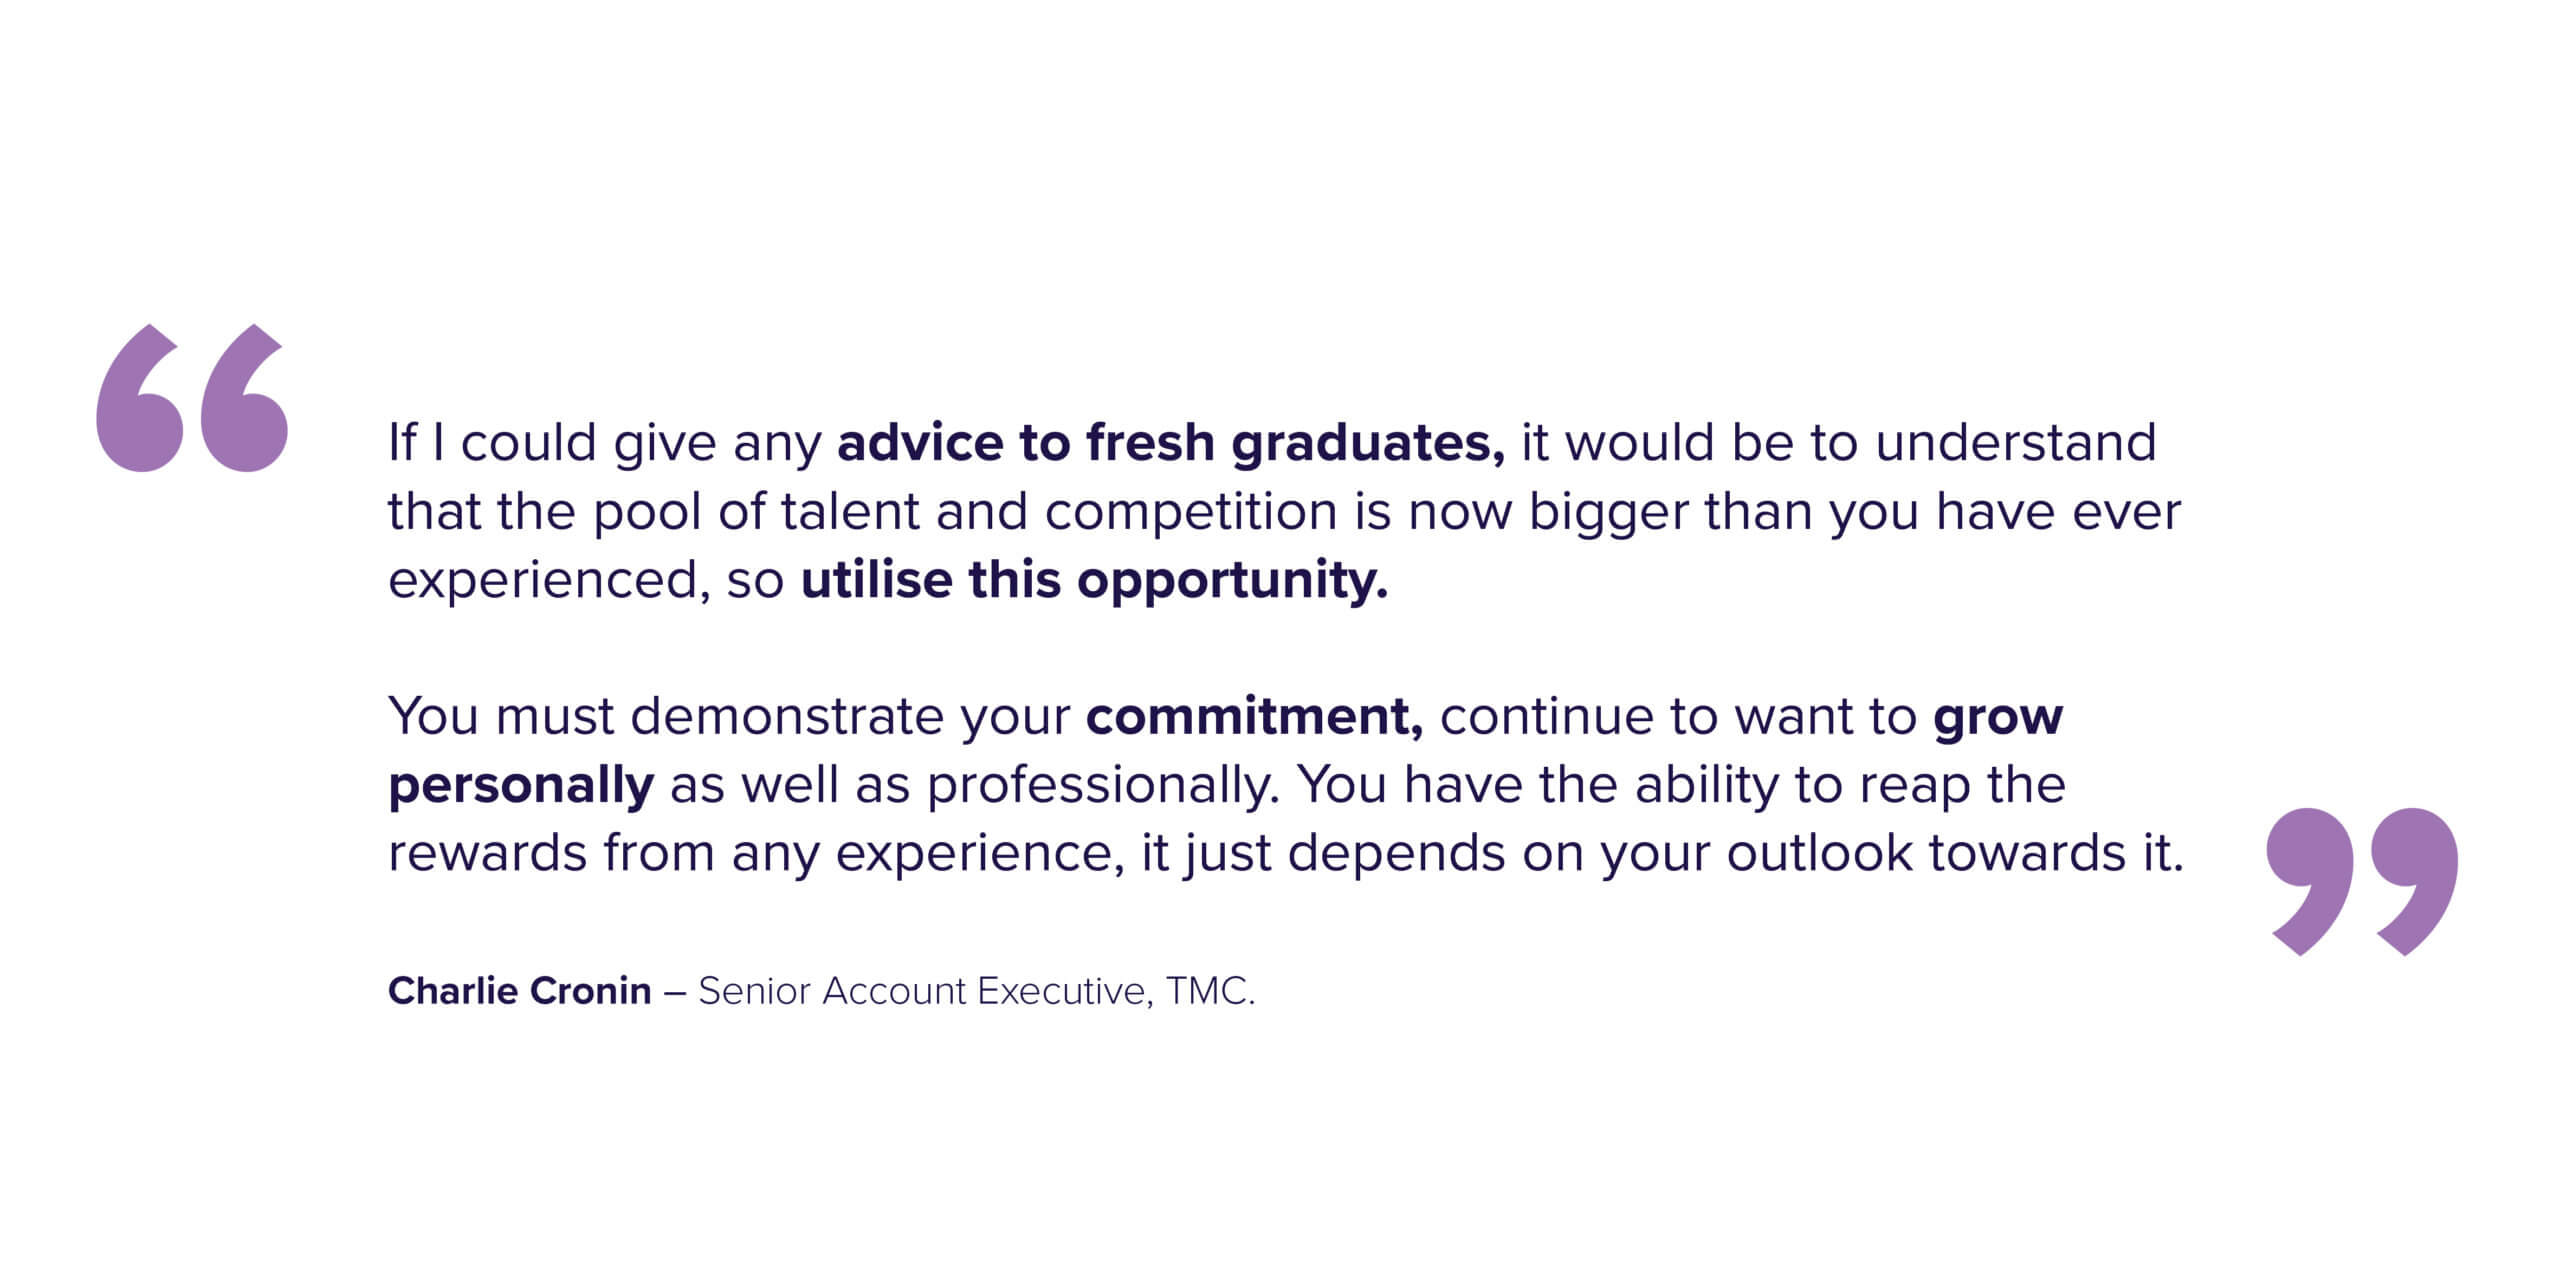 Quote giving advice to graduates on getting a job